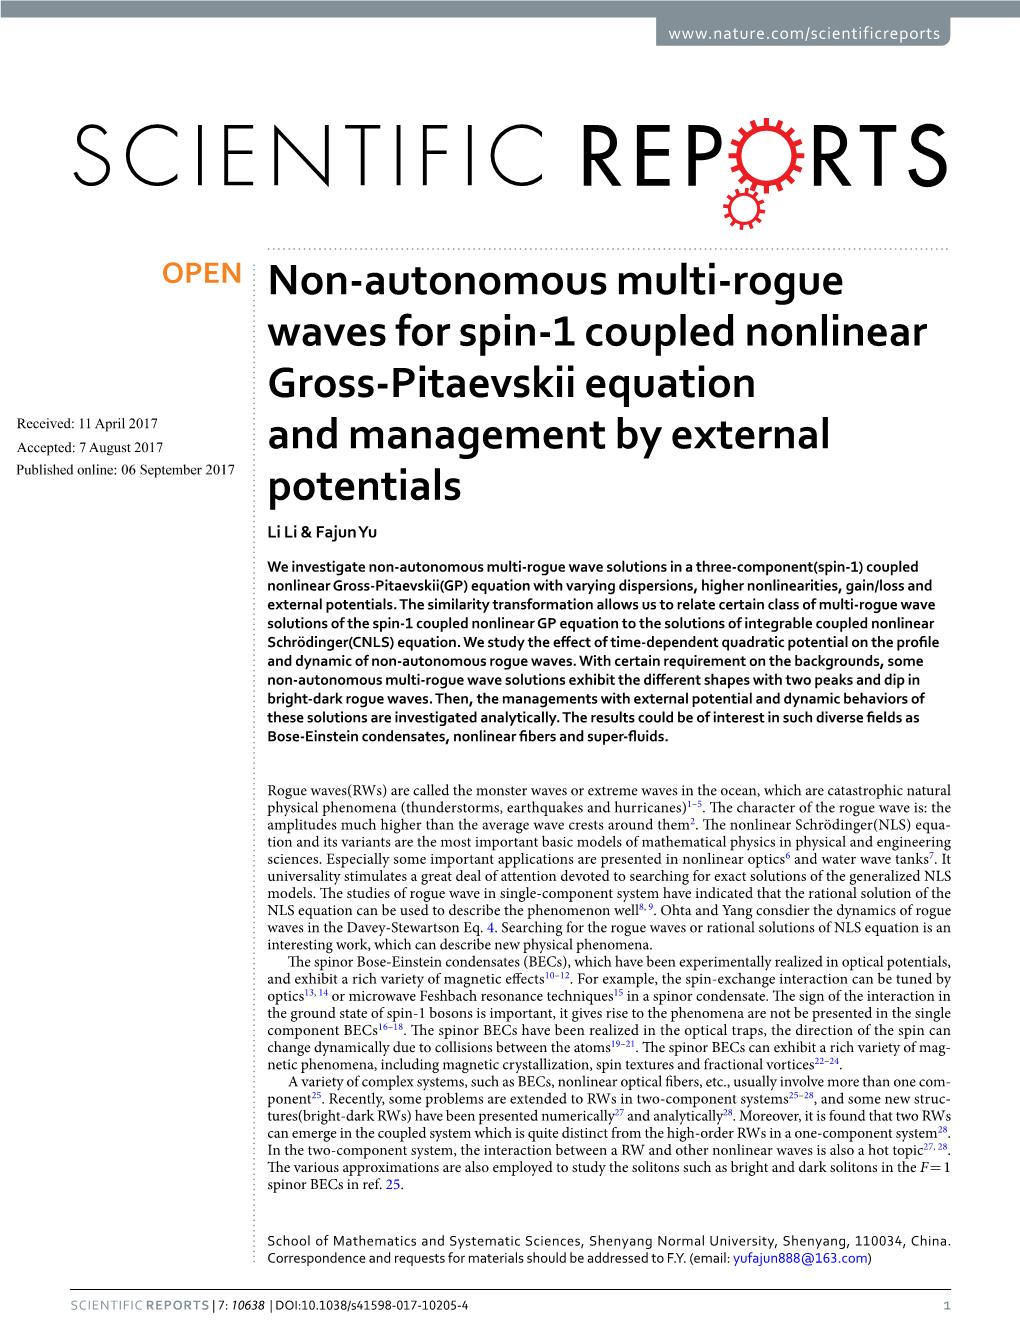 Non-Autonomous Multi-Rogue Waves for Spin-1 Coupled Nonlinear Gross